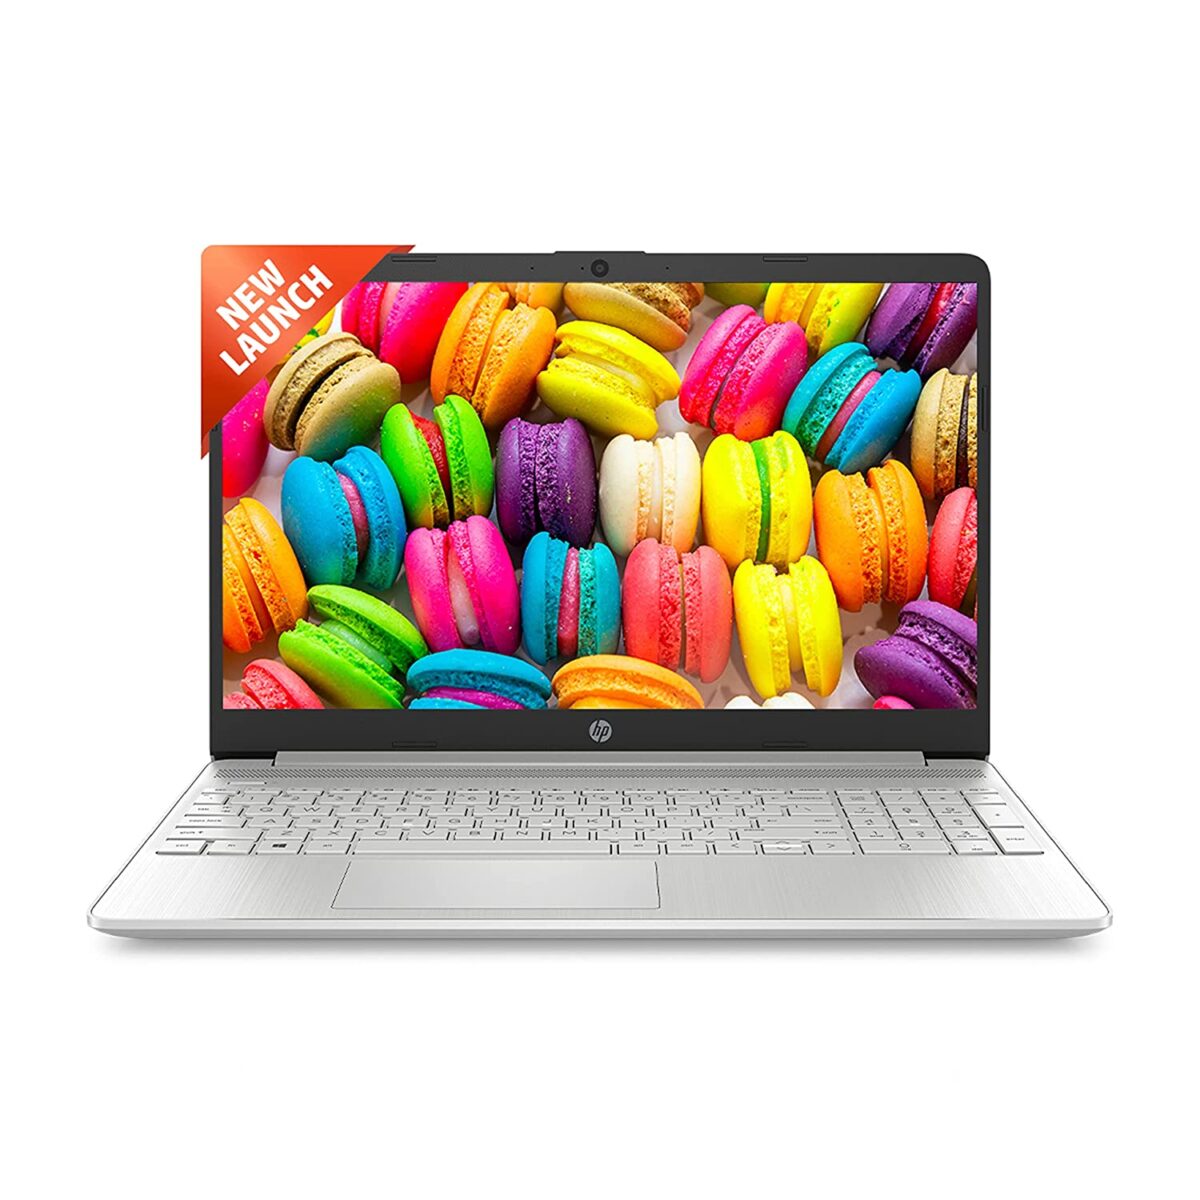 HP Laptop 15s-fq5009TU 67V52PA Specs, Price, and Features ( 12th Gen Intel Core i5 )